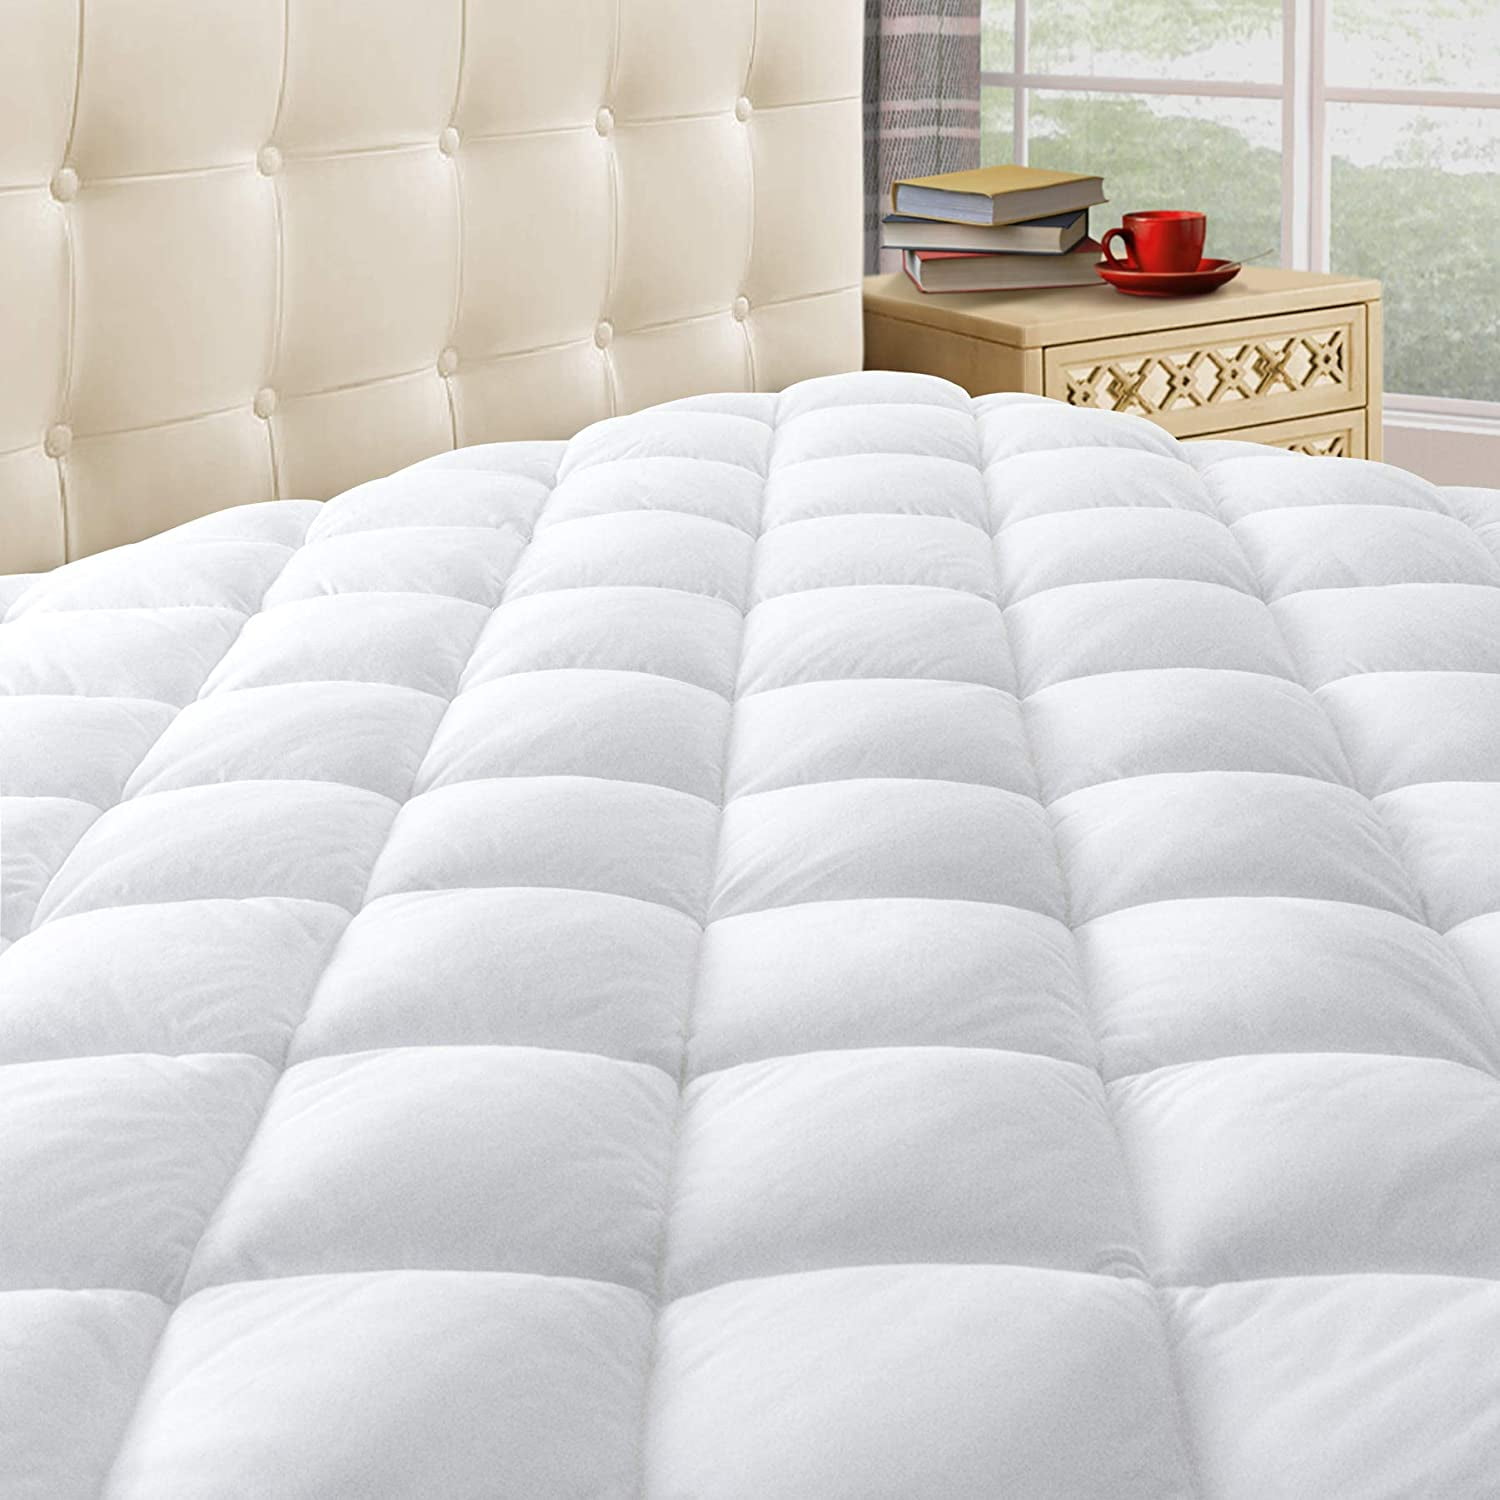 MATTRESS PAD TOPPER COVER PROTECTOR PILLOW TOP PLUSH SOFT HYPOALLERGENIC  FITTED 